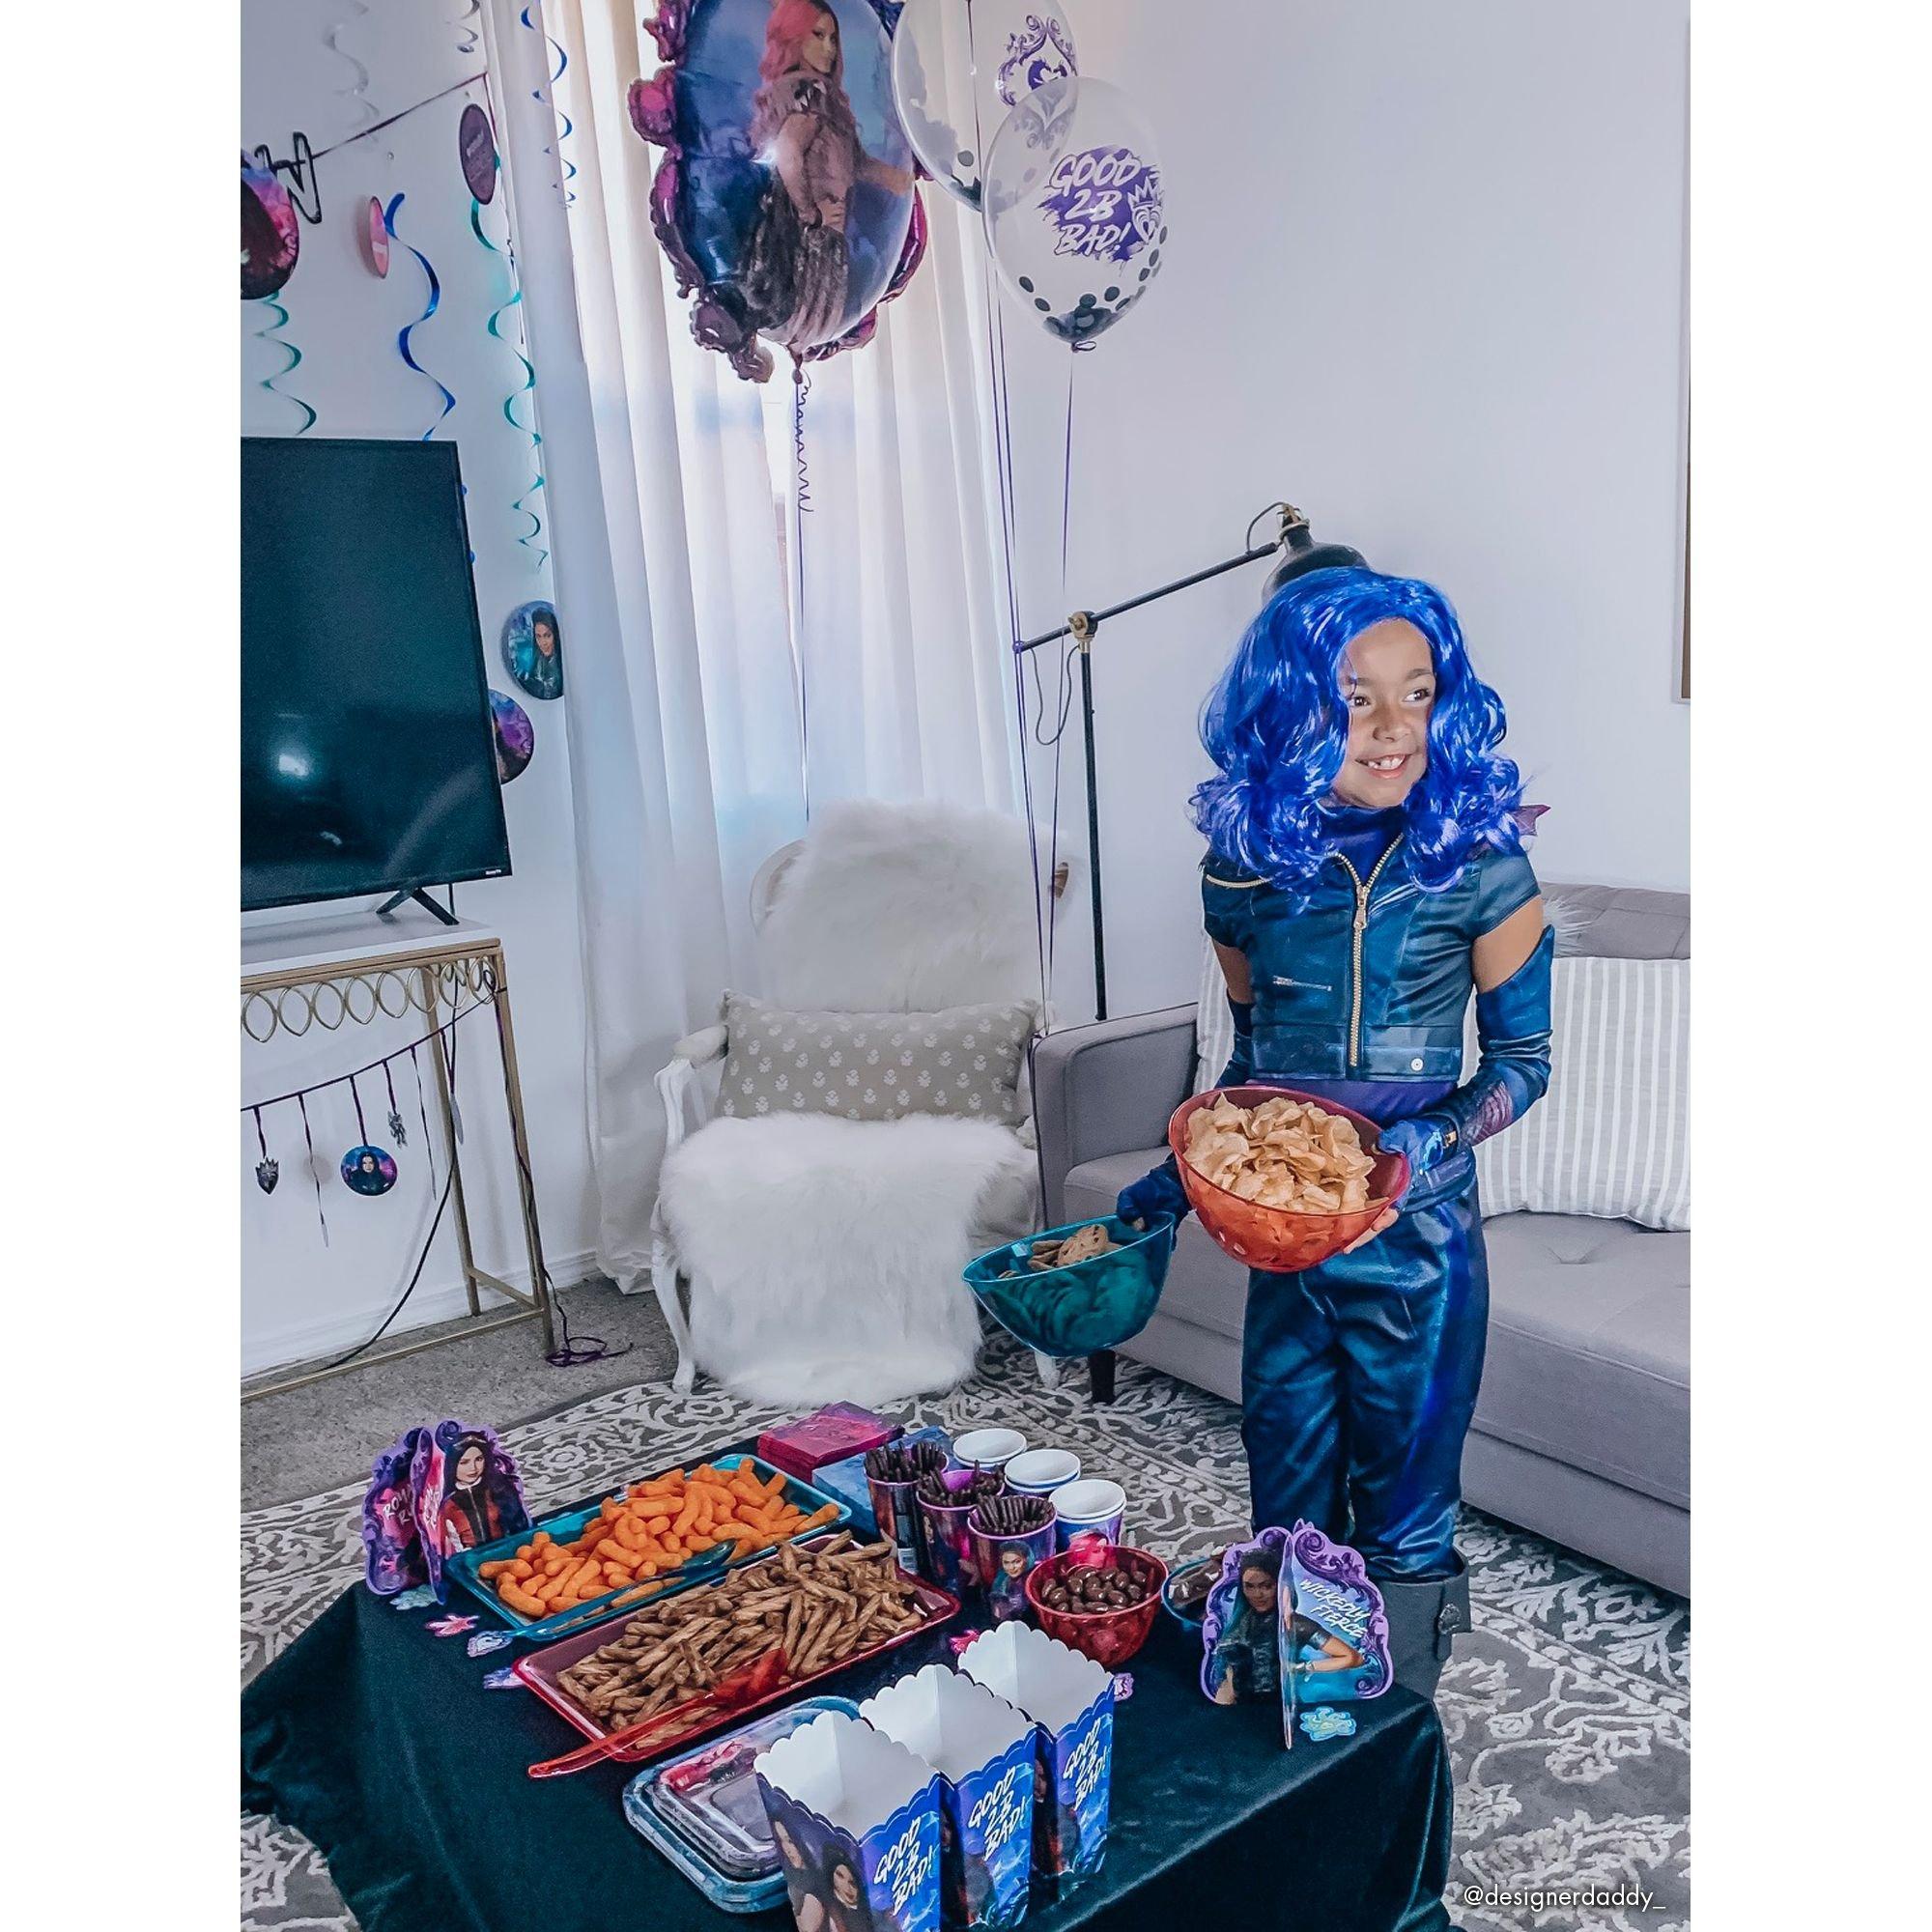 DESCENDANTS 3 CONFETTI VALUE PACK (3 types) ~ Birthday Party Supplies Foil  Table